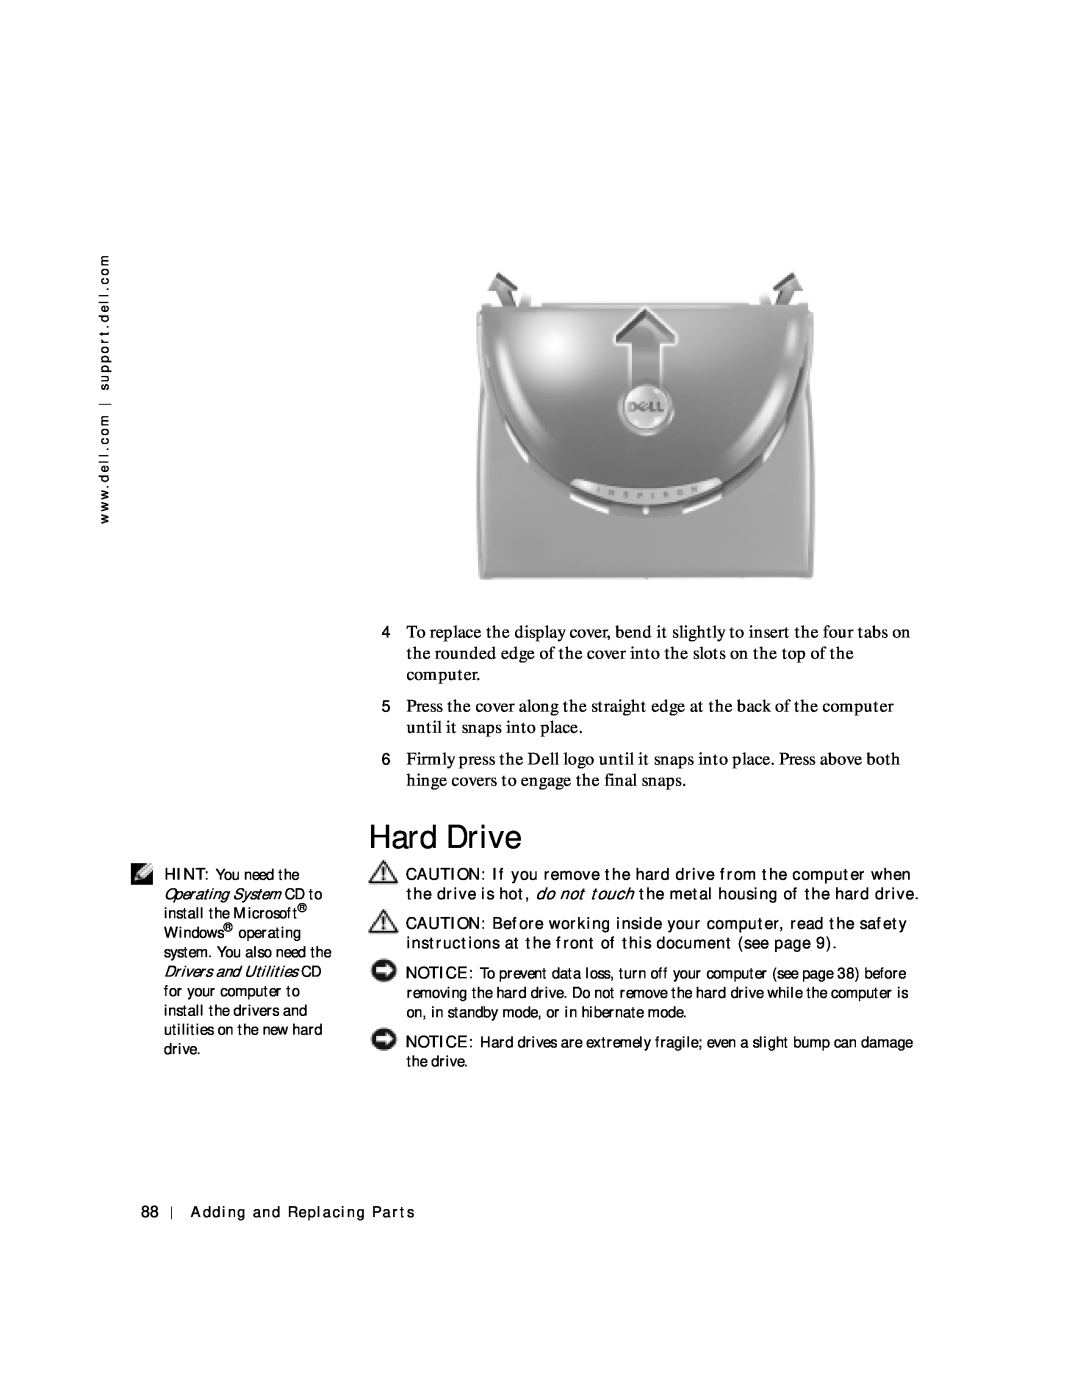 Dell 4150 owner manual Hard Drive 